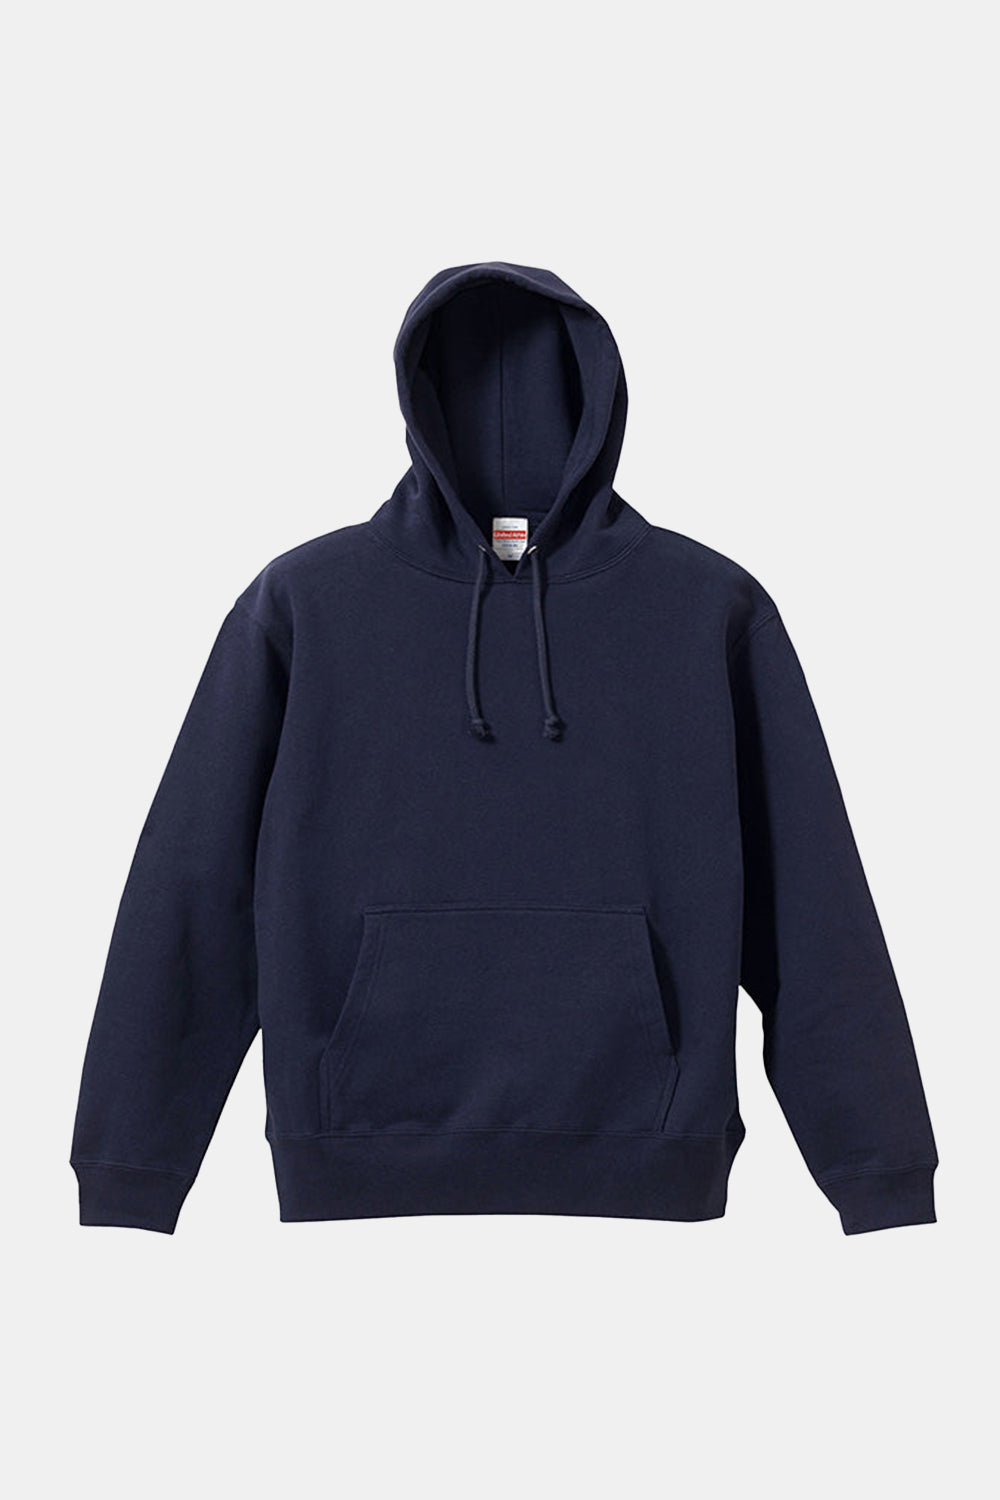 United Athle 5214 10.0oz Sweat Pullover Hoodie (Navy)
